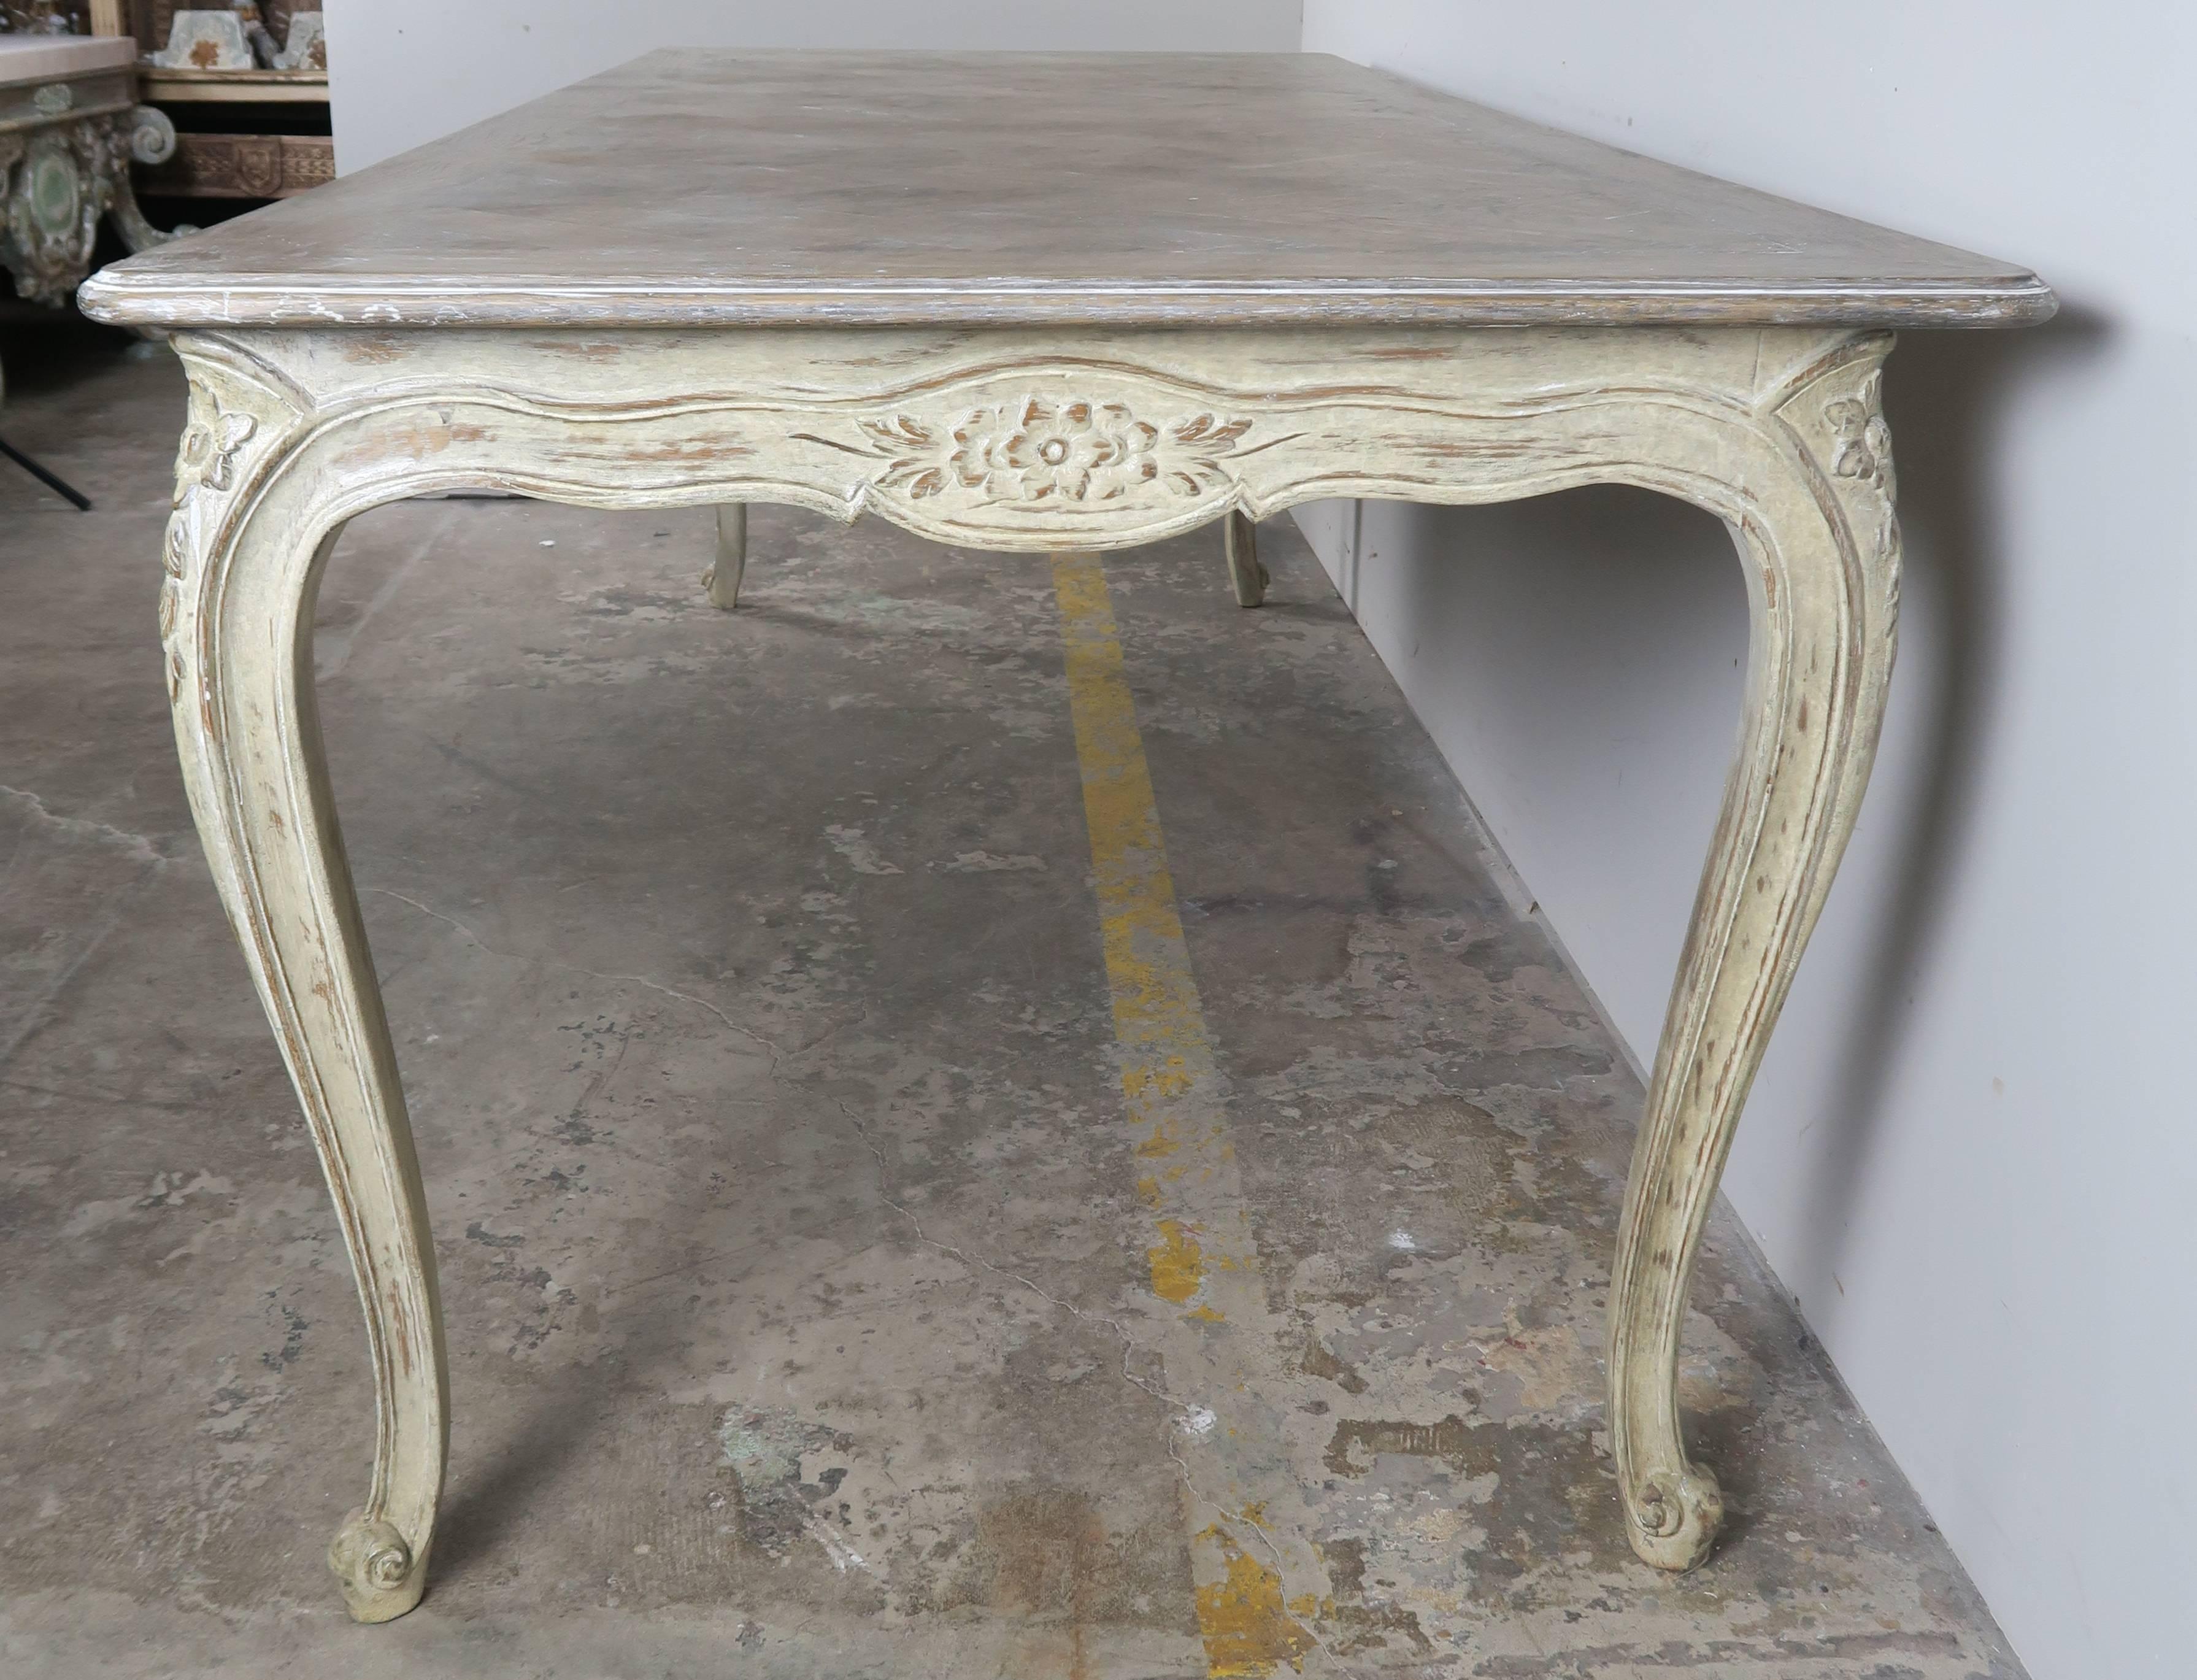 French Louis XV style painted dining table standing on four cabriole legs ending in ram's head feet. Chevron pattern inlaid top. Soft celadon colored washed painted finish.